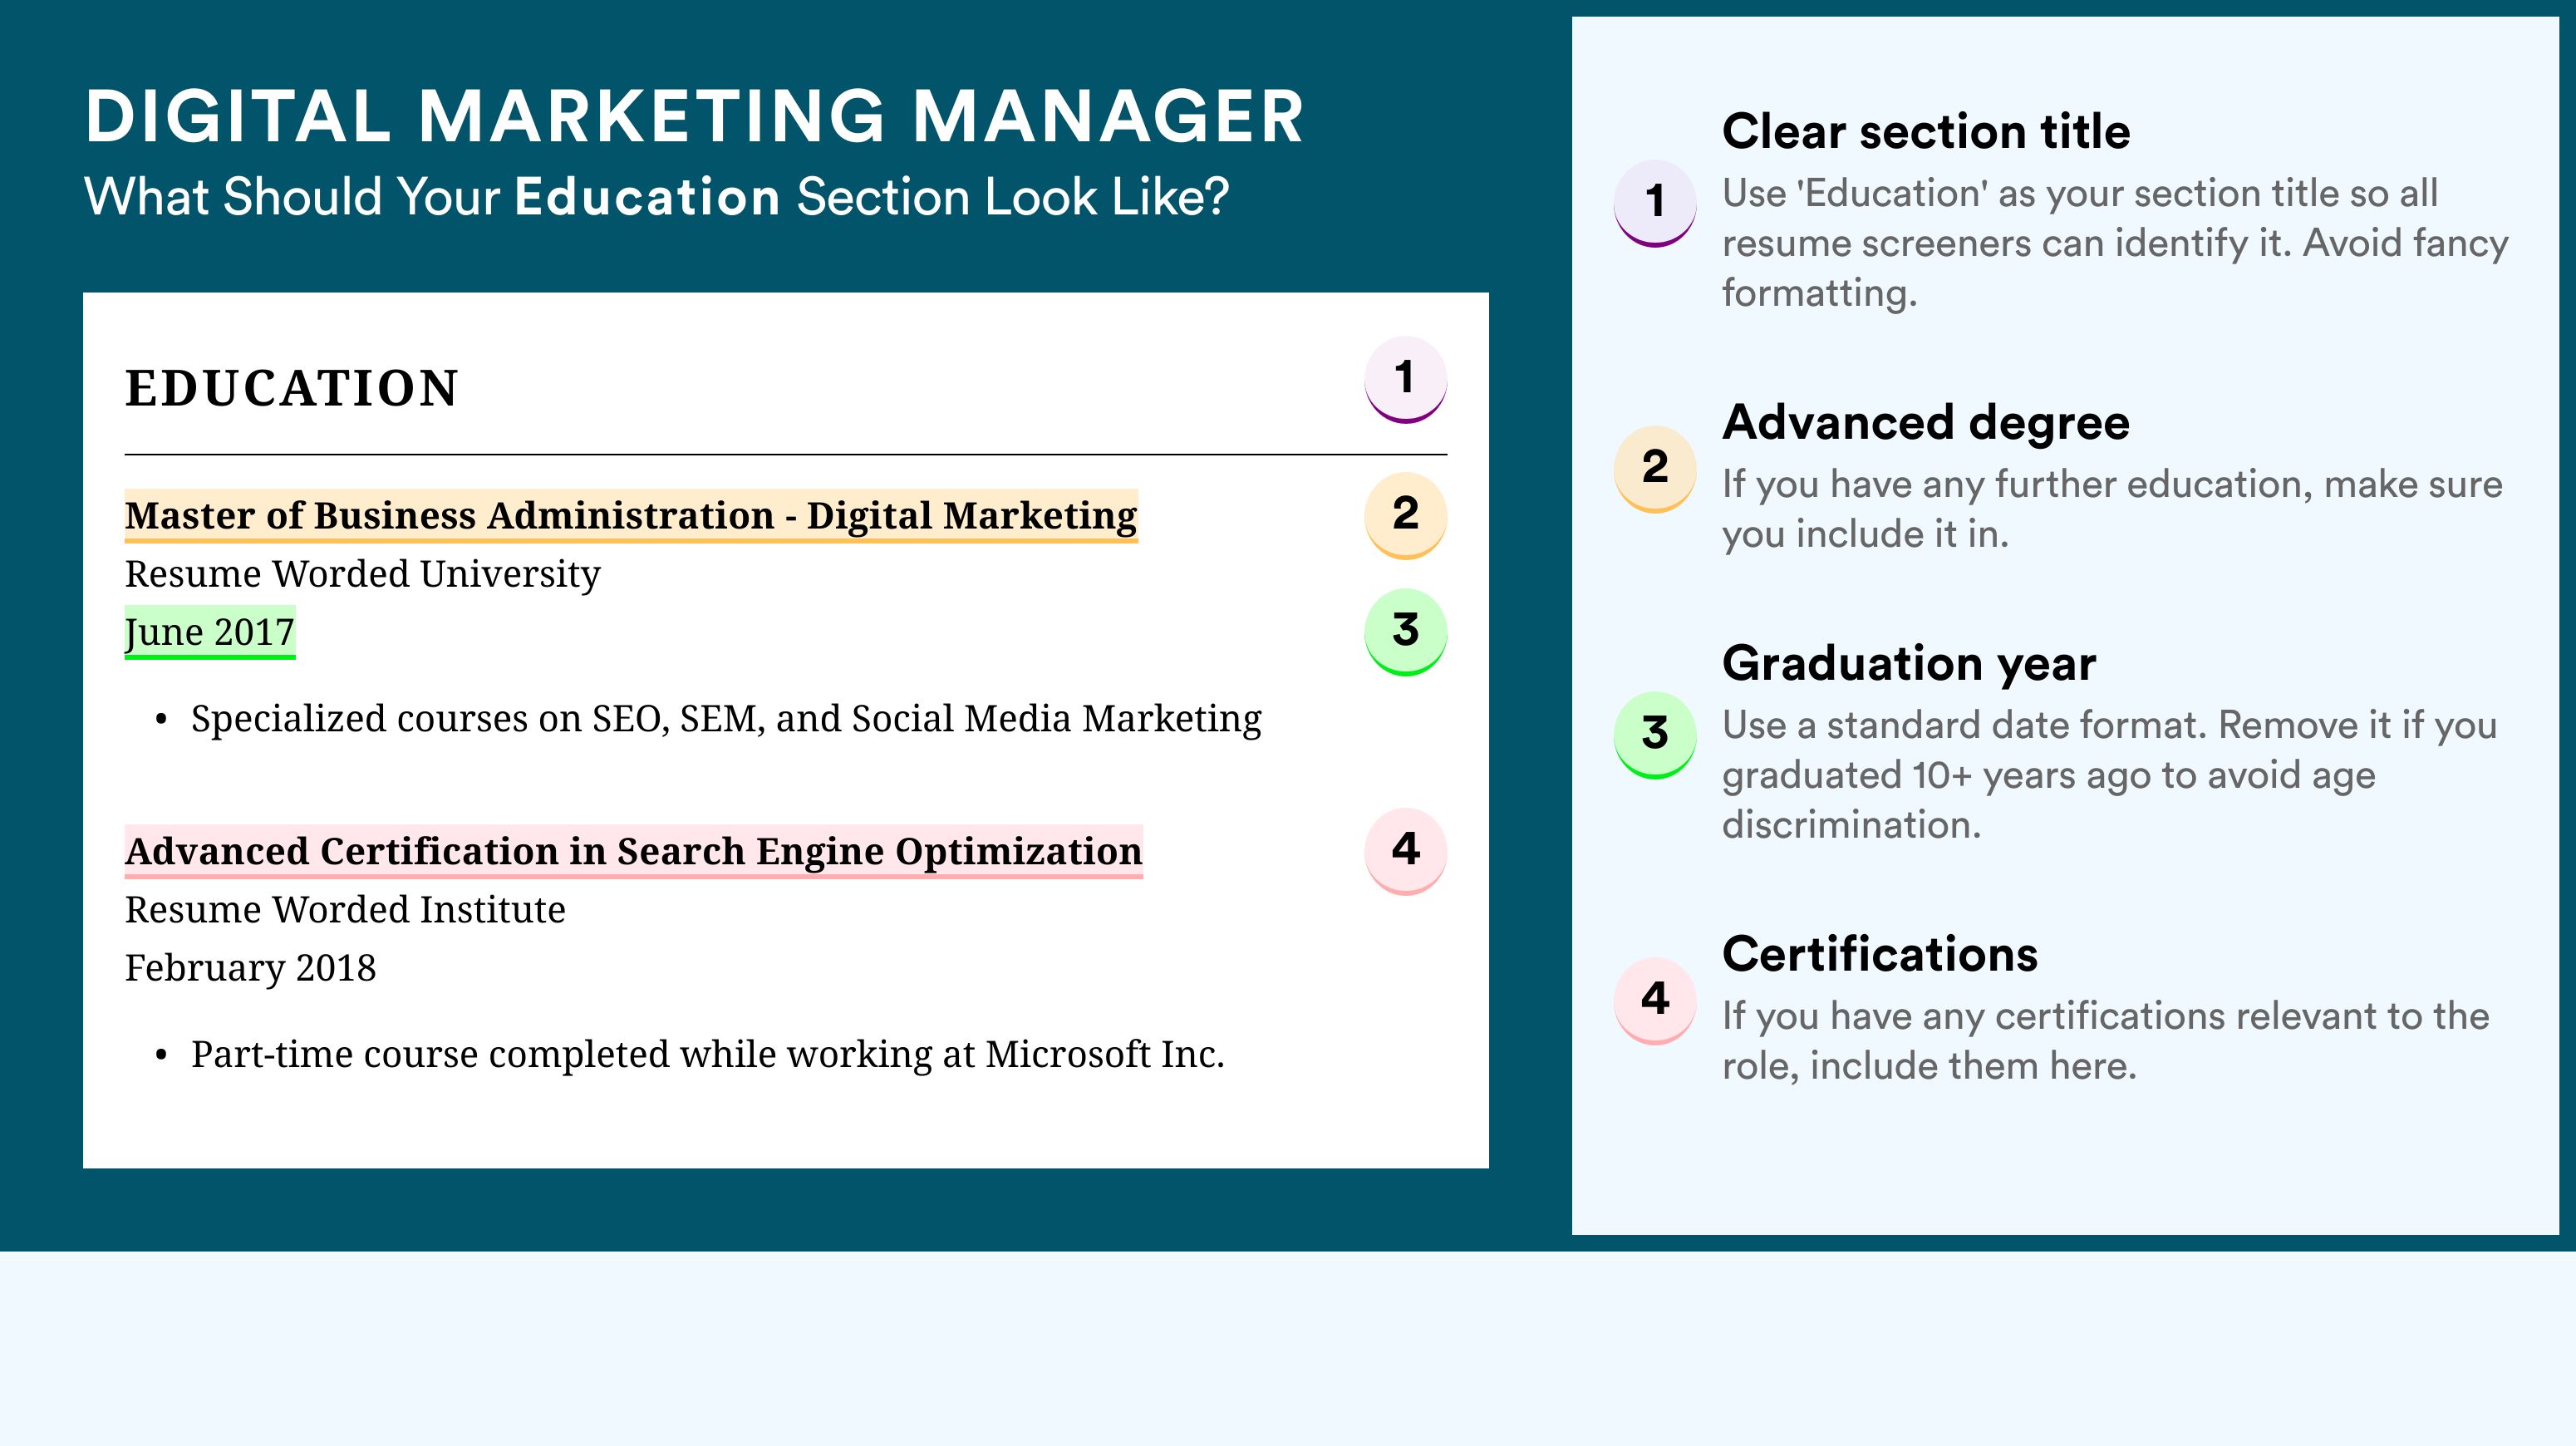 How To Write An Education Section - Digital Marketing Manager Roles